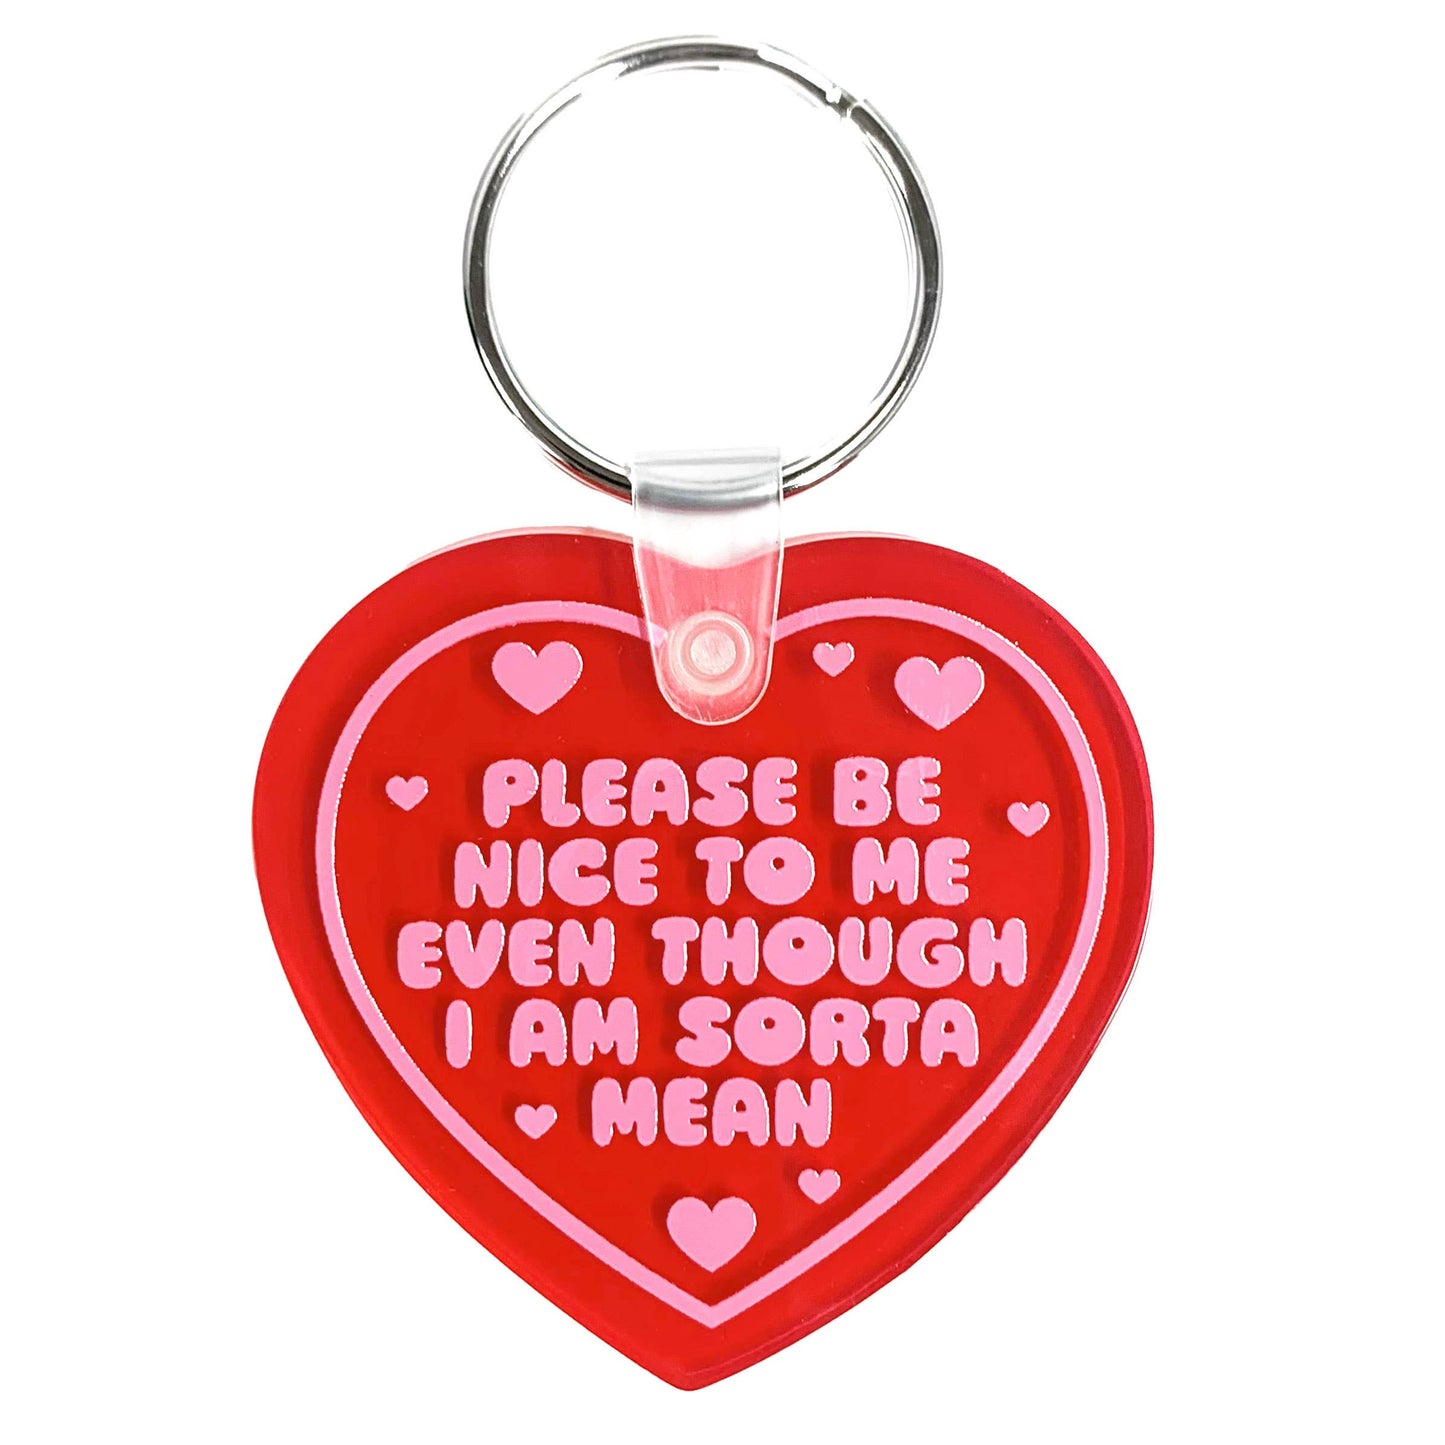 Please Be Nice To Me Heart Shaped Vinyl Keychain